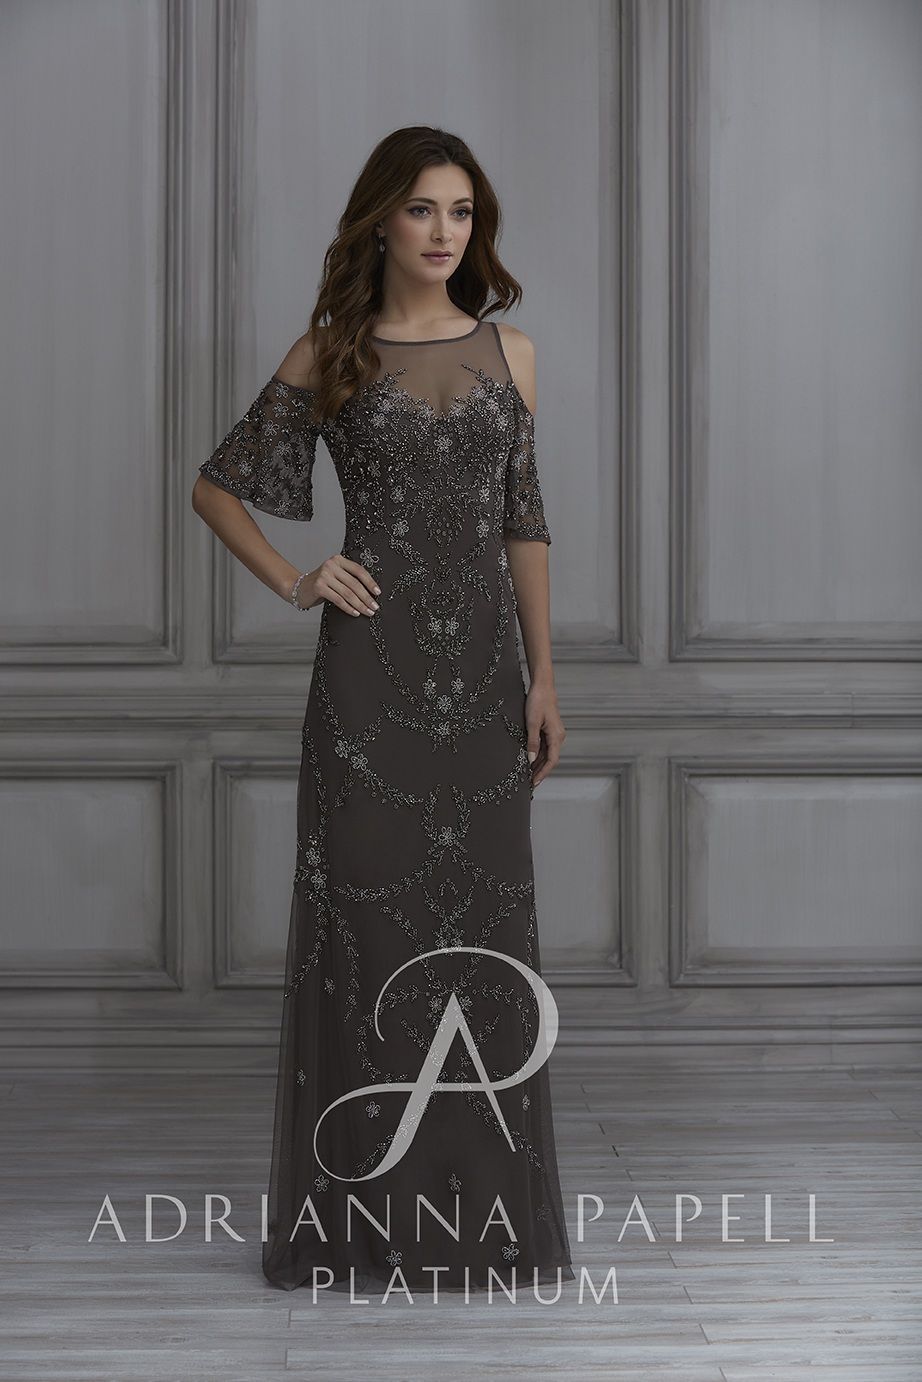 Adrianna Papell Platinum Bridesmaids 40368 Fiancee over 1000 gowns IN-STOCK  | Prom Dresses | Wedding Dresses | Tuxedos